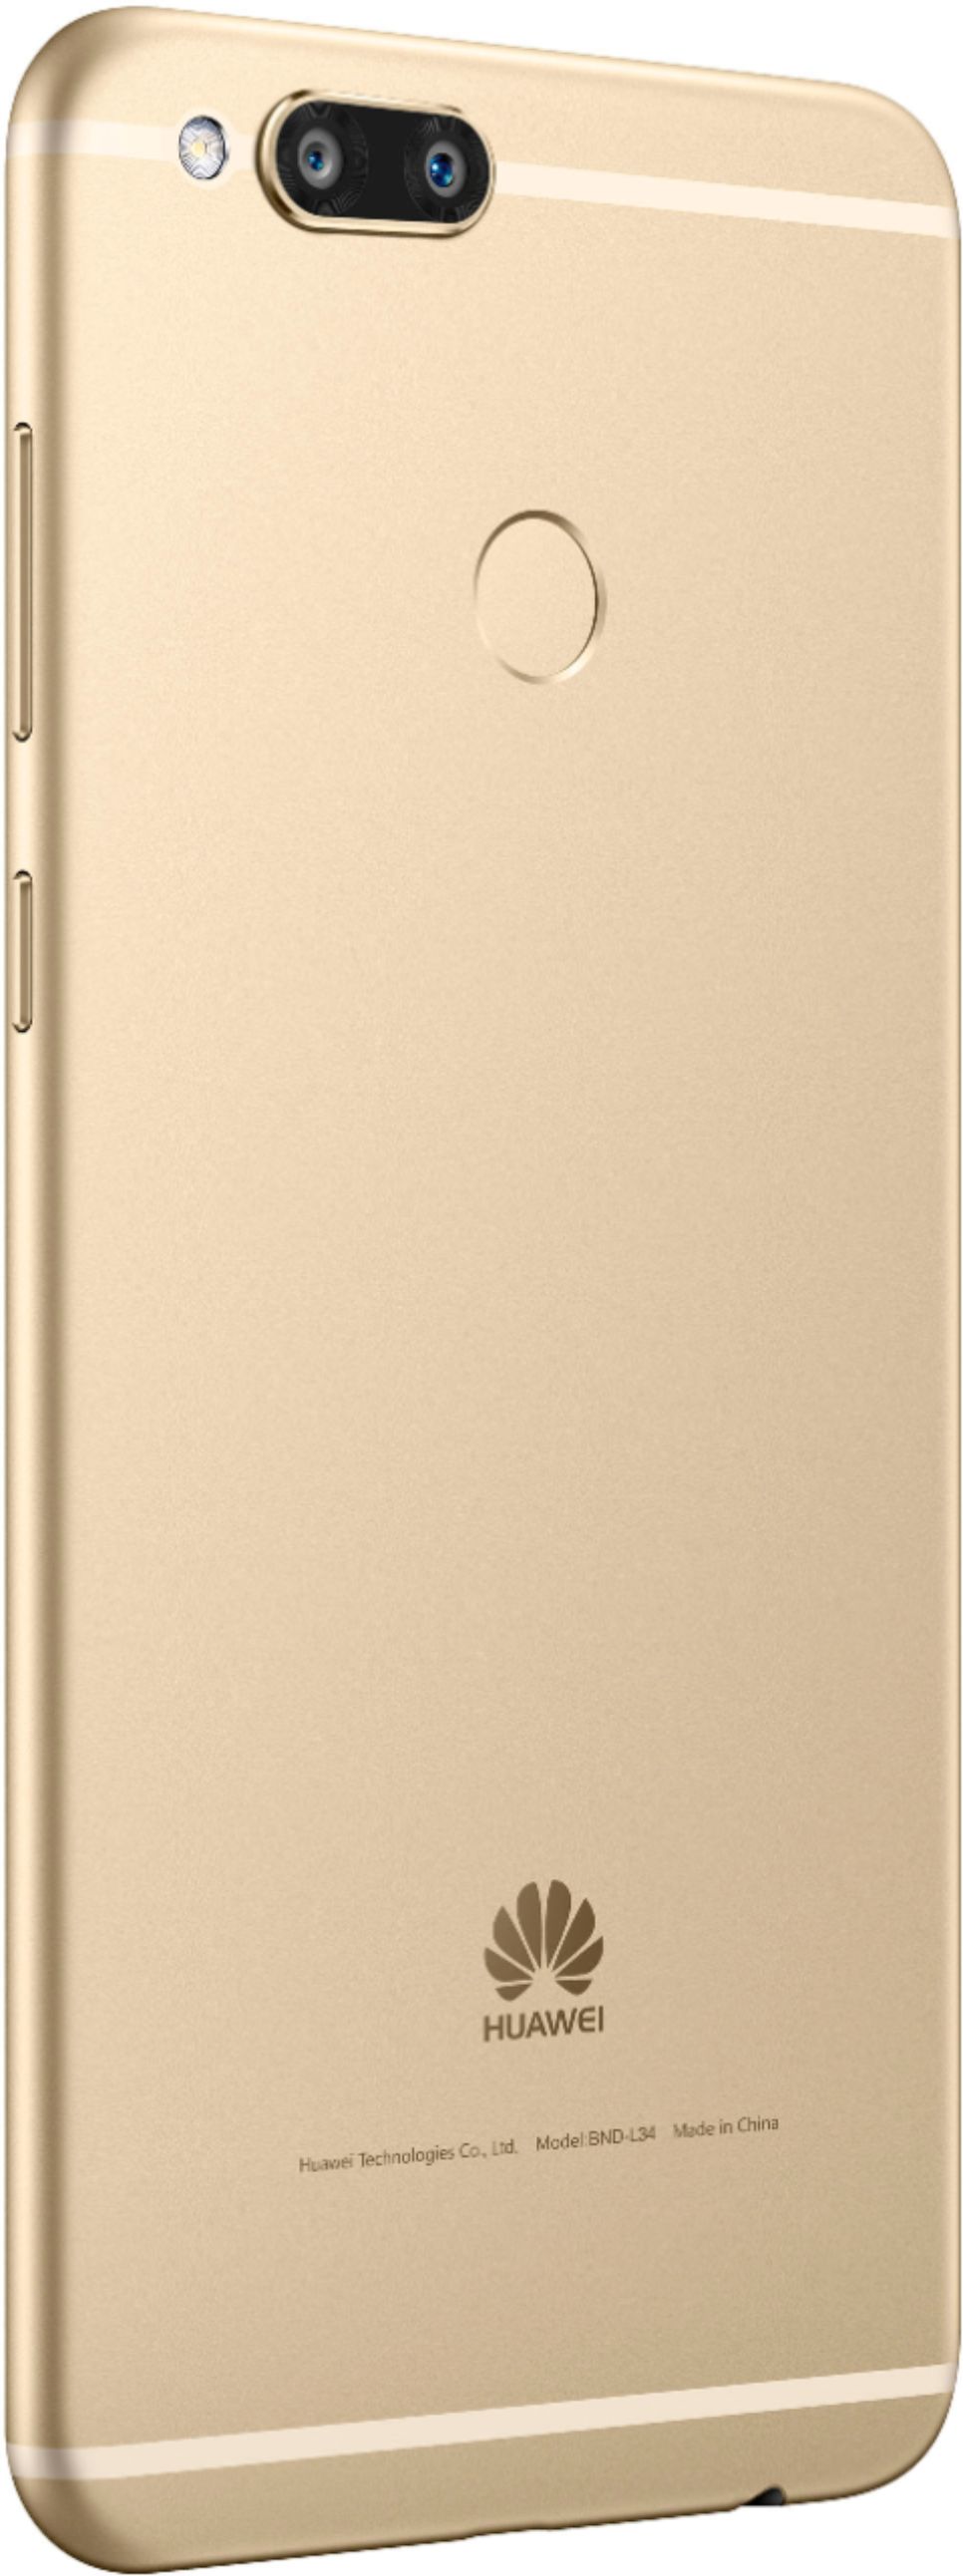 desinfecteren Enzovoorts plak Best Buy: Huawei Mate SE 4G LTE with 64GB Memory Cell Phone (Unlocked) Gold  BOND-L34C